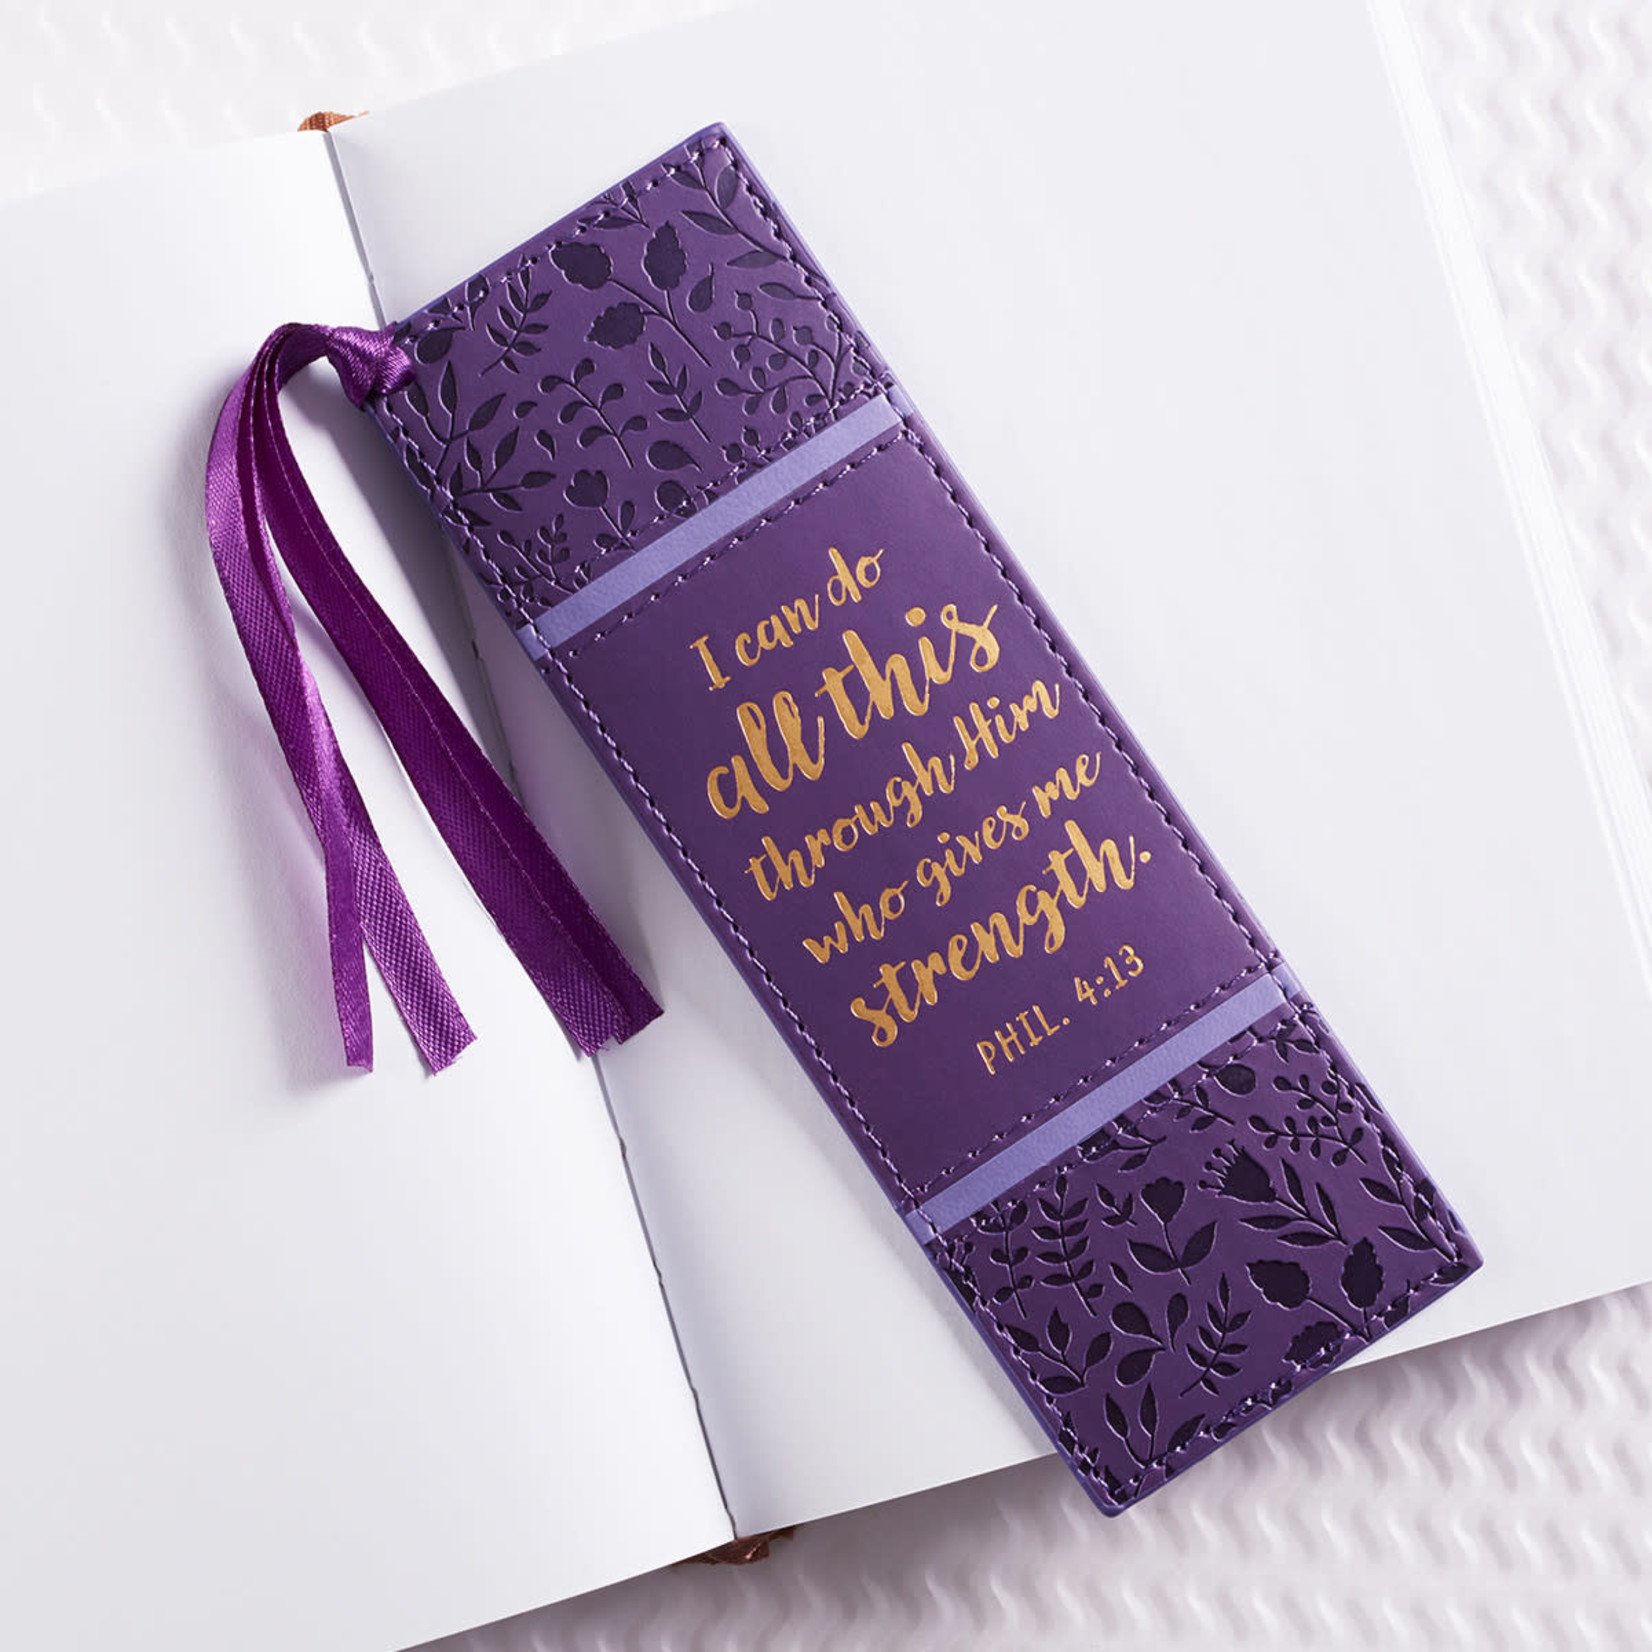 Christian Art Gifts I Can Do All This - Purple Faux Leather Bookmark - Philippians 4:13